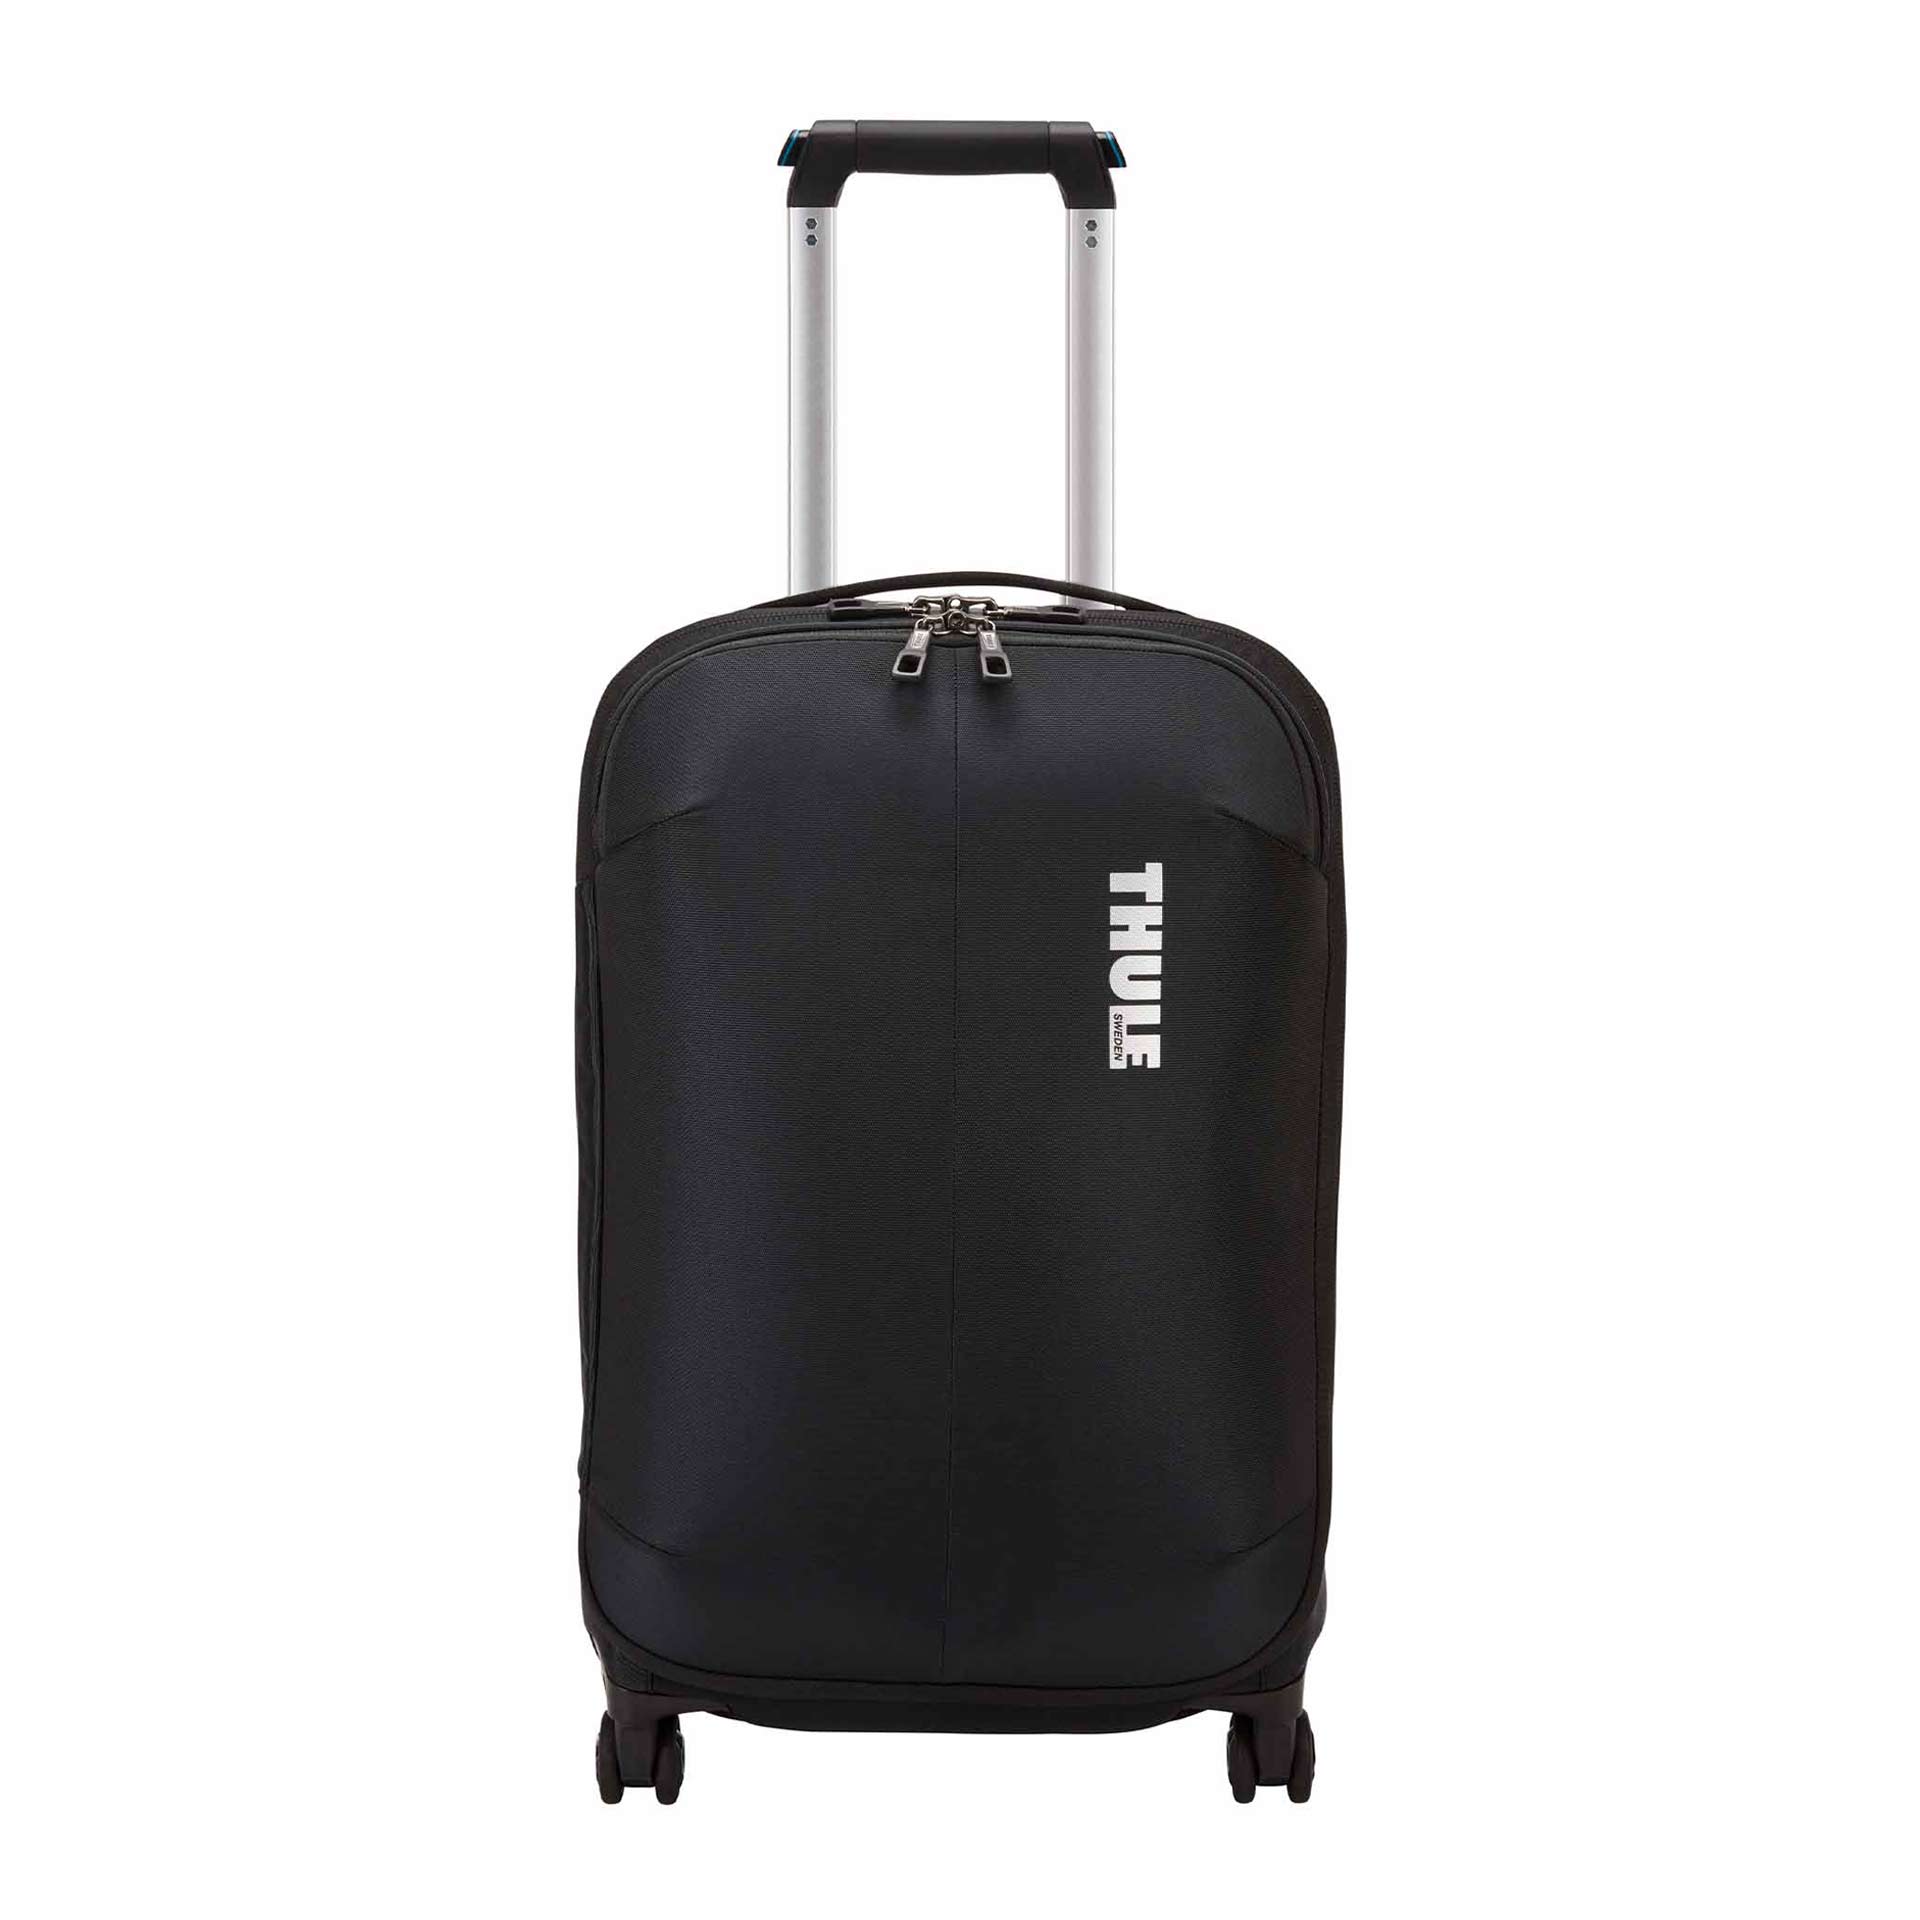 Thule Subterra Carry-On 4-Rad Trolley S